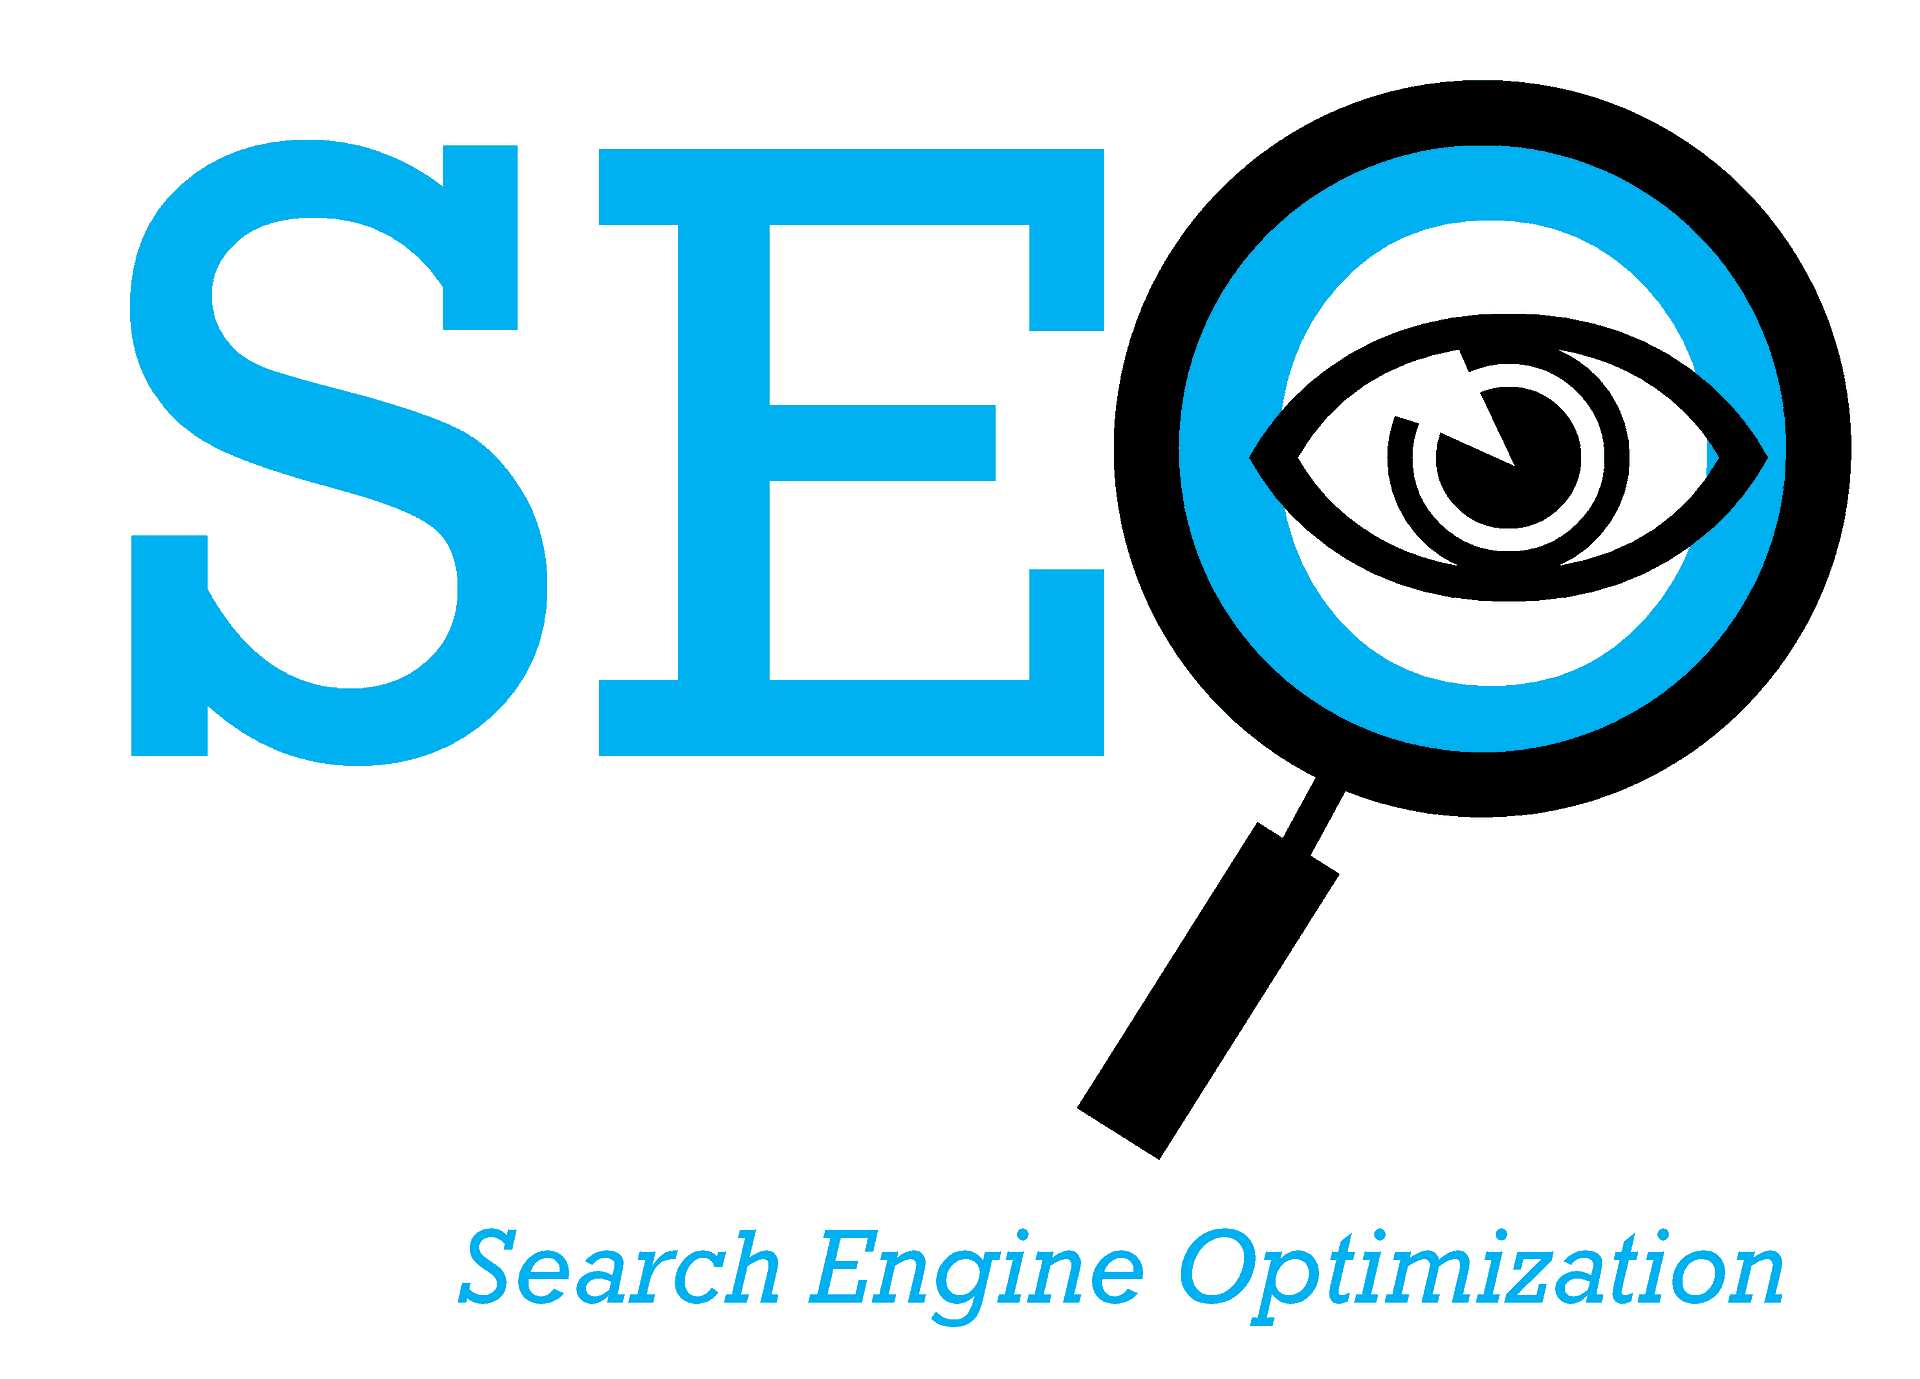 Steps How To Make Your Blog SEO Friendly